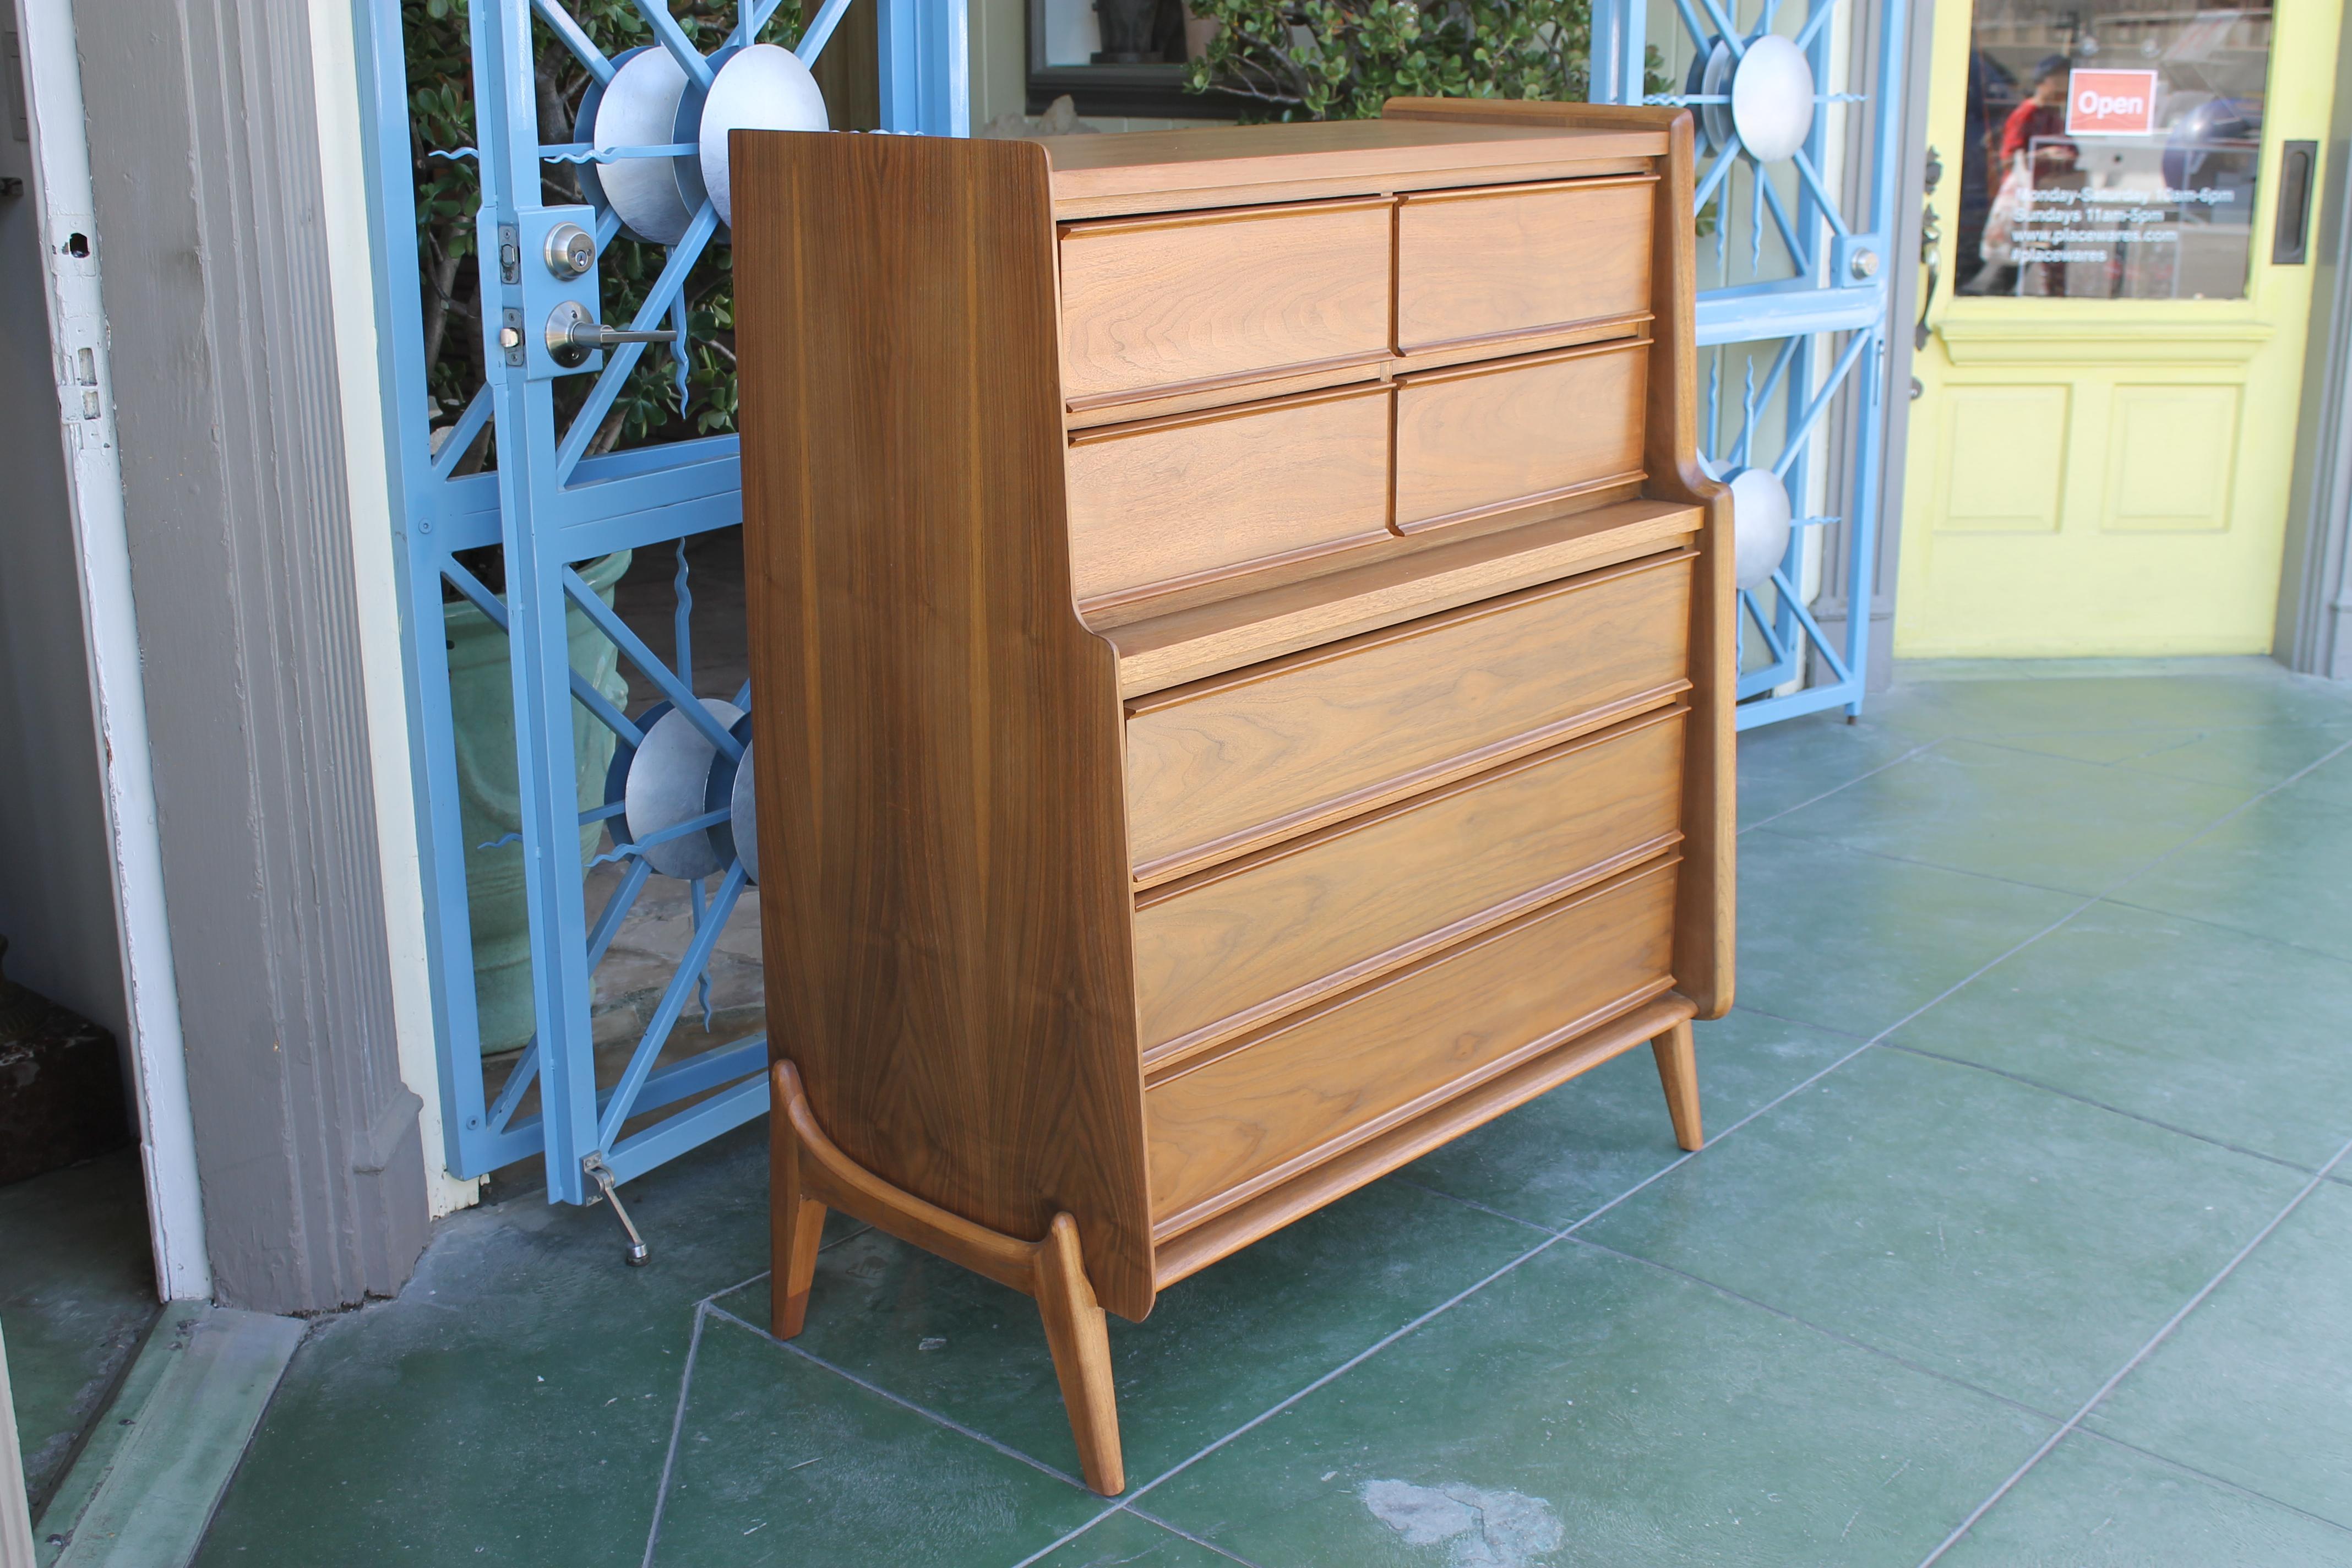 This striking Mid-Century Modern highboy dresser by United Furniture features seven spacious drawers with blind pulls, a sculptural base reminiscent of Kagan and Pearsall, and a modern multi-tiered profile. Four small drawers are on the upper level.